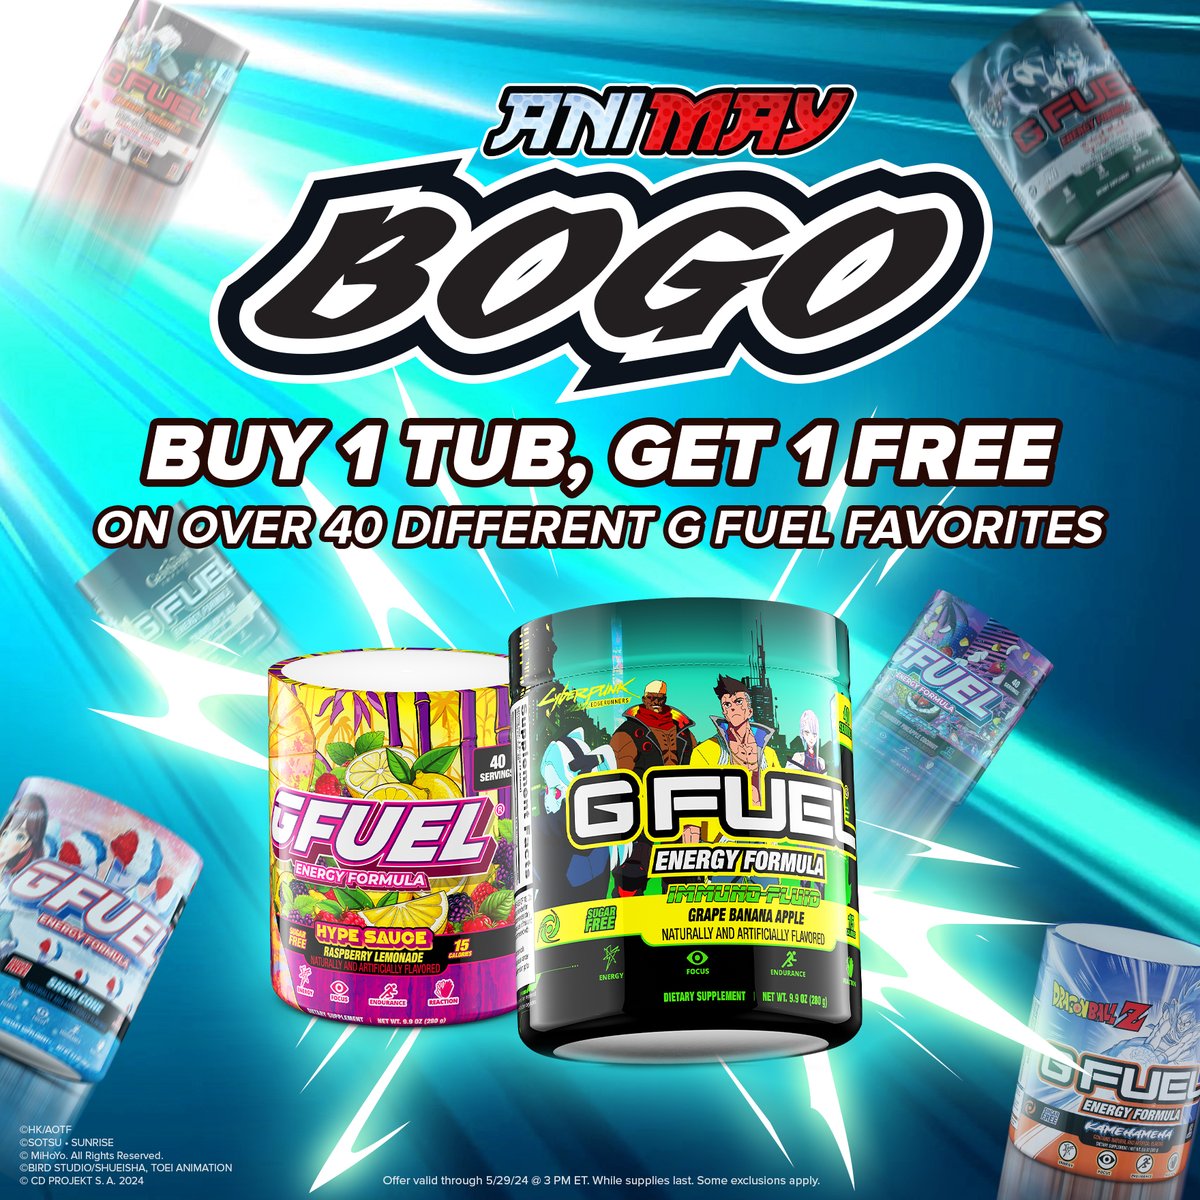 Only a couple days left to take advantage of the @GFuelEnergy #GFUELAnimay BOGO Sale! Some of flavors I'd recommend - Hype Sauce, Sage Mode, & Watermelon Limeade 🔥🔥🔥 ➡️ affiliateshop.gfuel.com/bogo-immortal